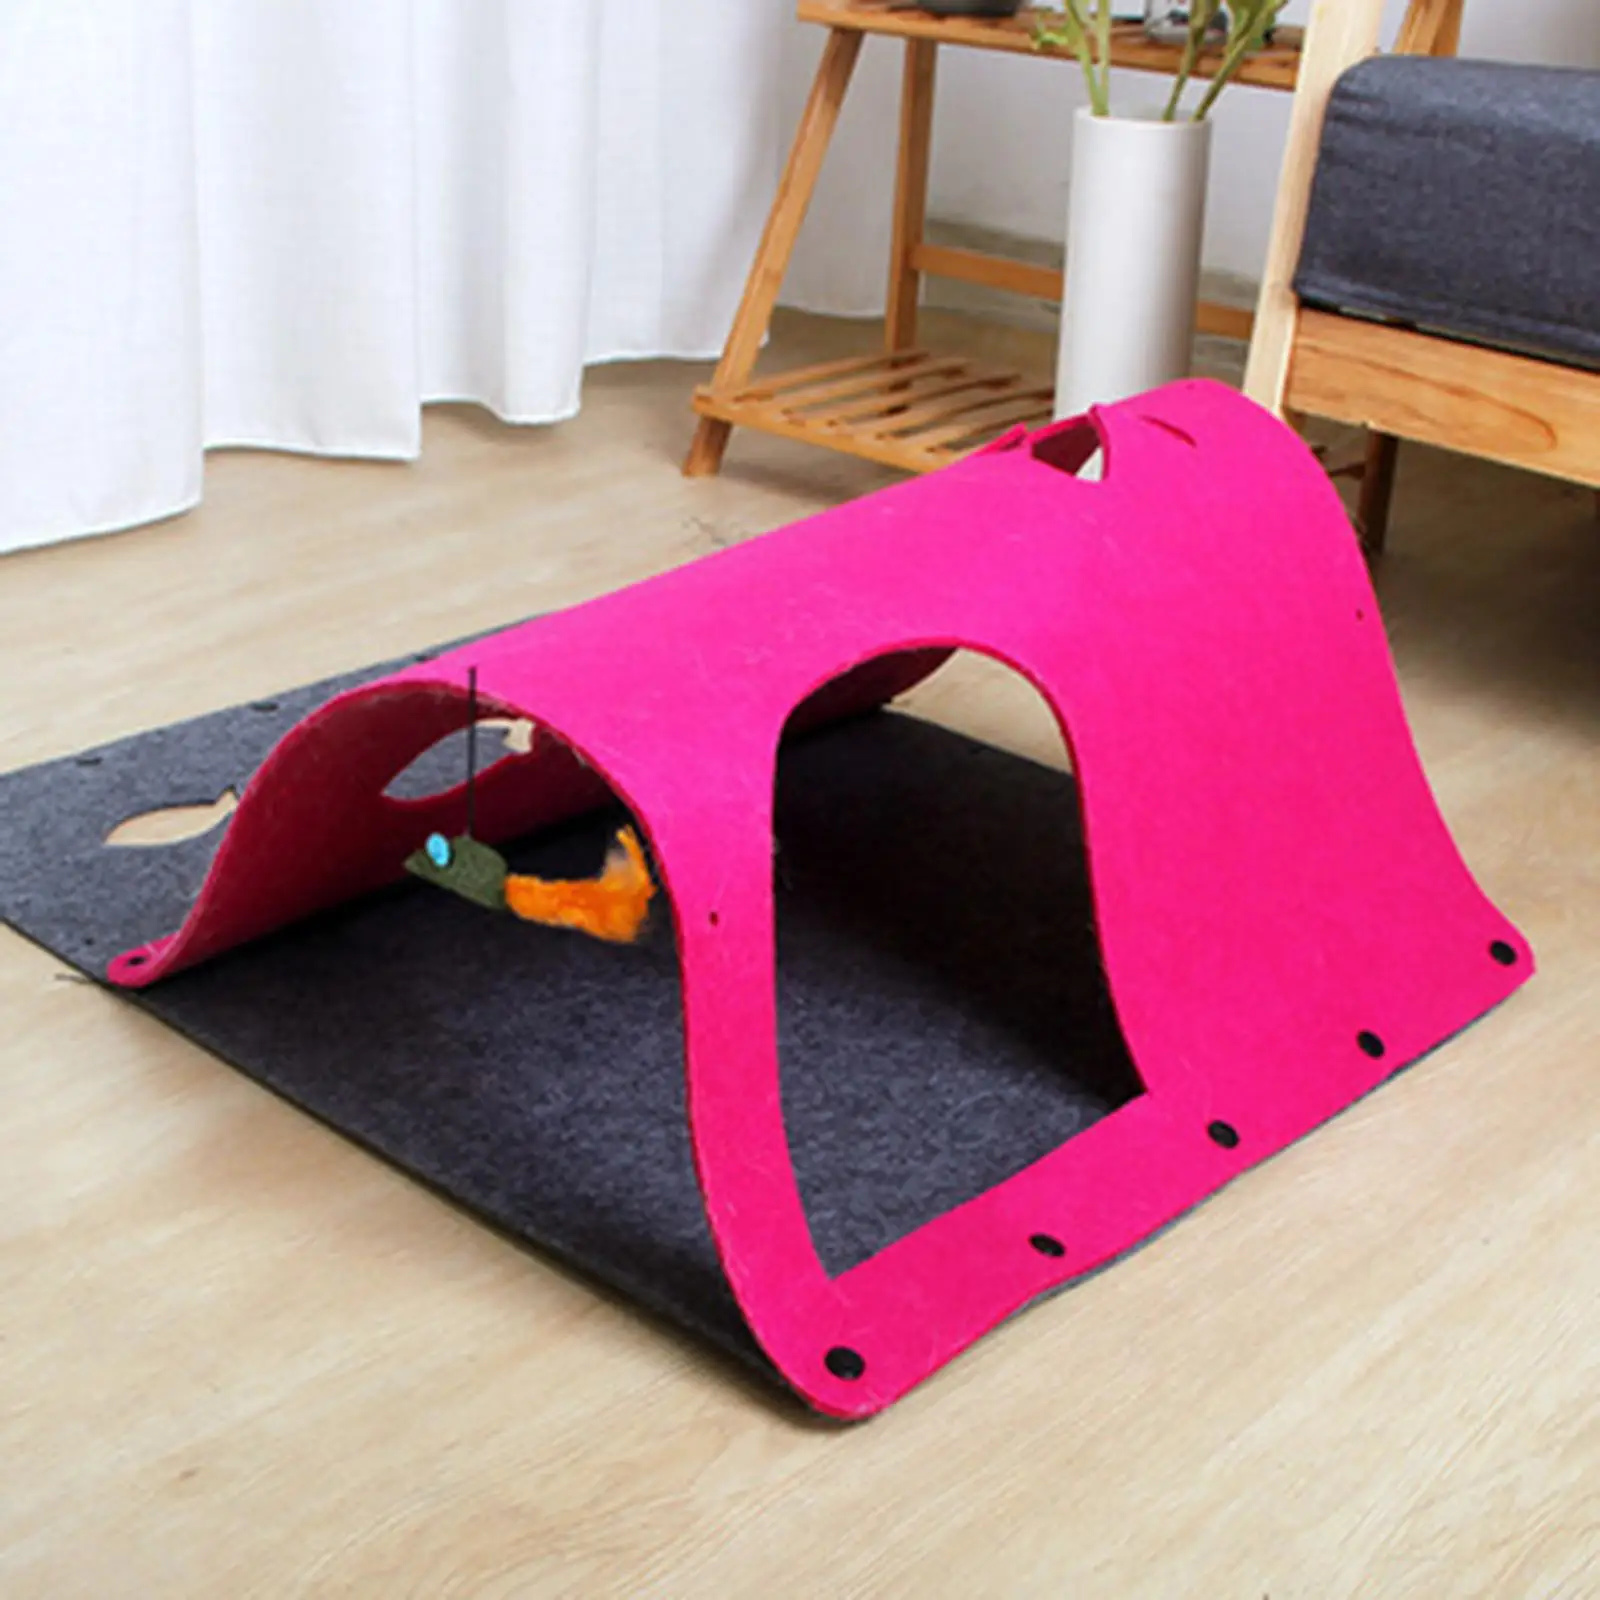 Felt Cat Tunnel with Hanging Mouse Interactive Toy Peep Hole Play Mat Cat Toy Cat Tube for Kitten Exercise Rabbit Hides 44x60cm